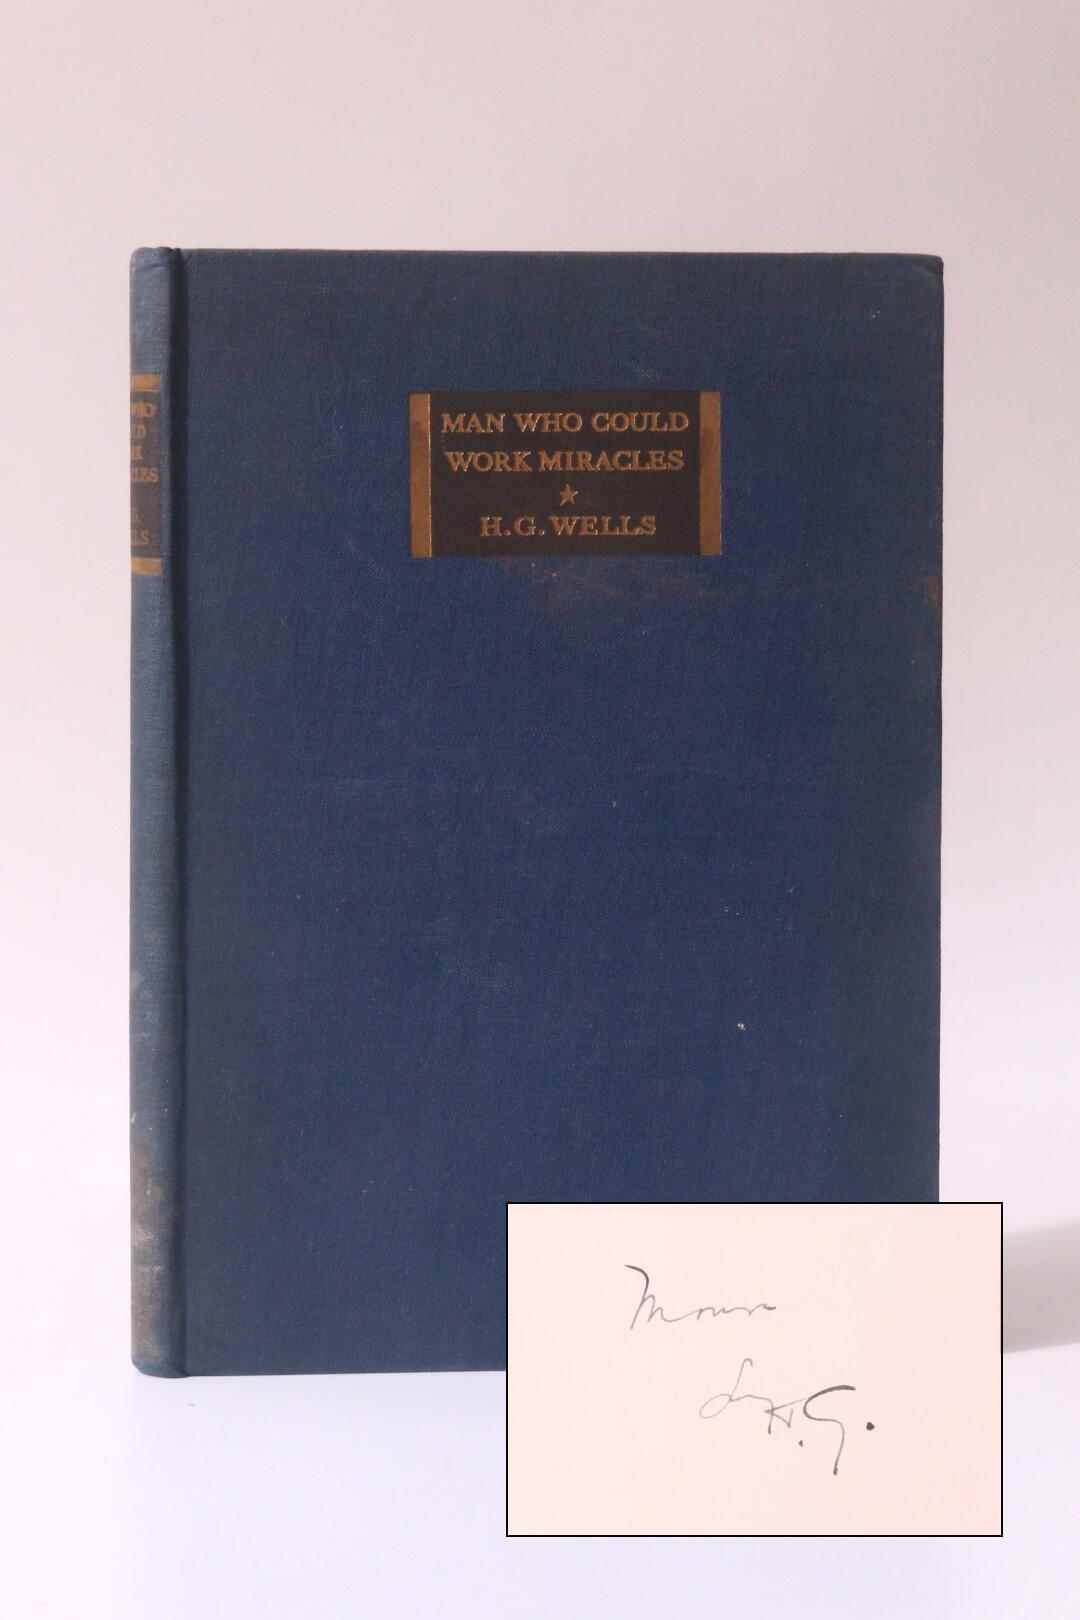 H.G. Wells - Man Who Could Work Miracles. - Cresset Press, 1936, Signed First Edition.